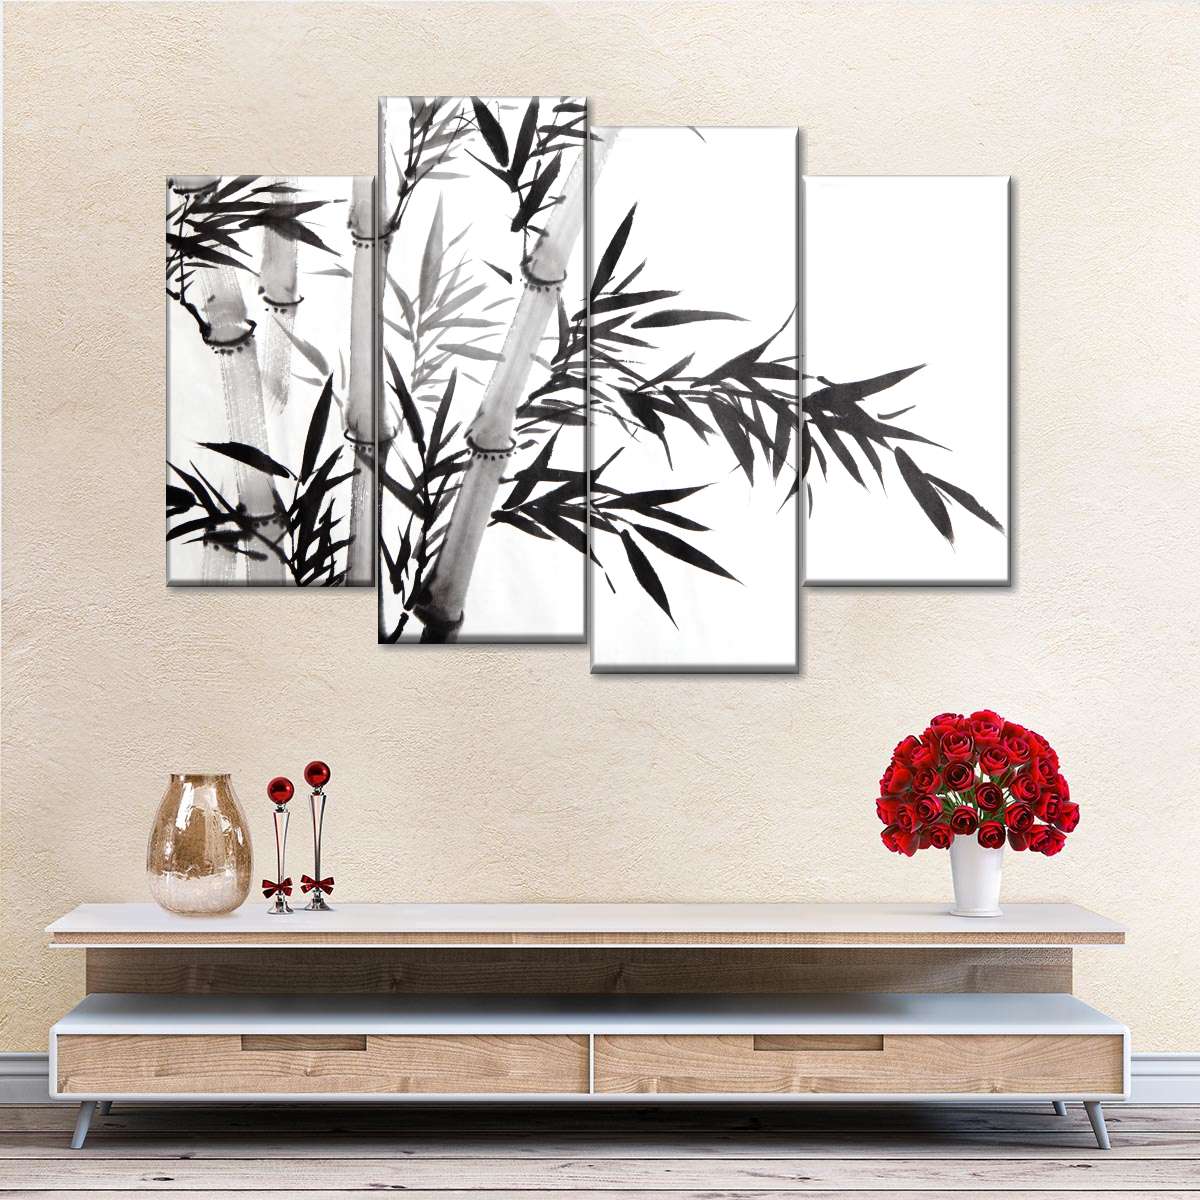 TutuBeer Bamboo Canvas Wall Art for Home Decor Bamboo Paintings for Wall Bamboo Wall Picture Chinese Painting of Bamboo Forest Nature Picture Print on - 5